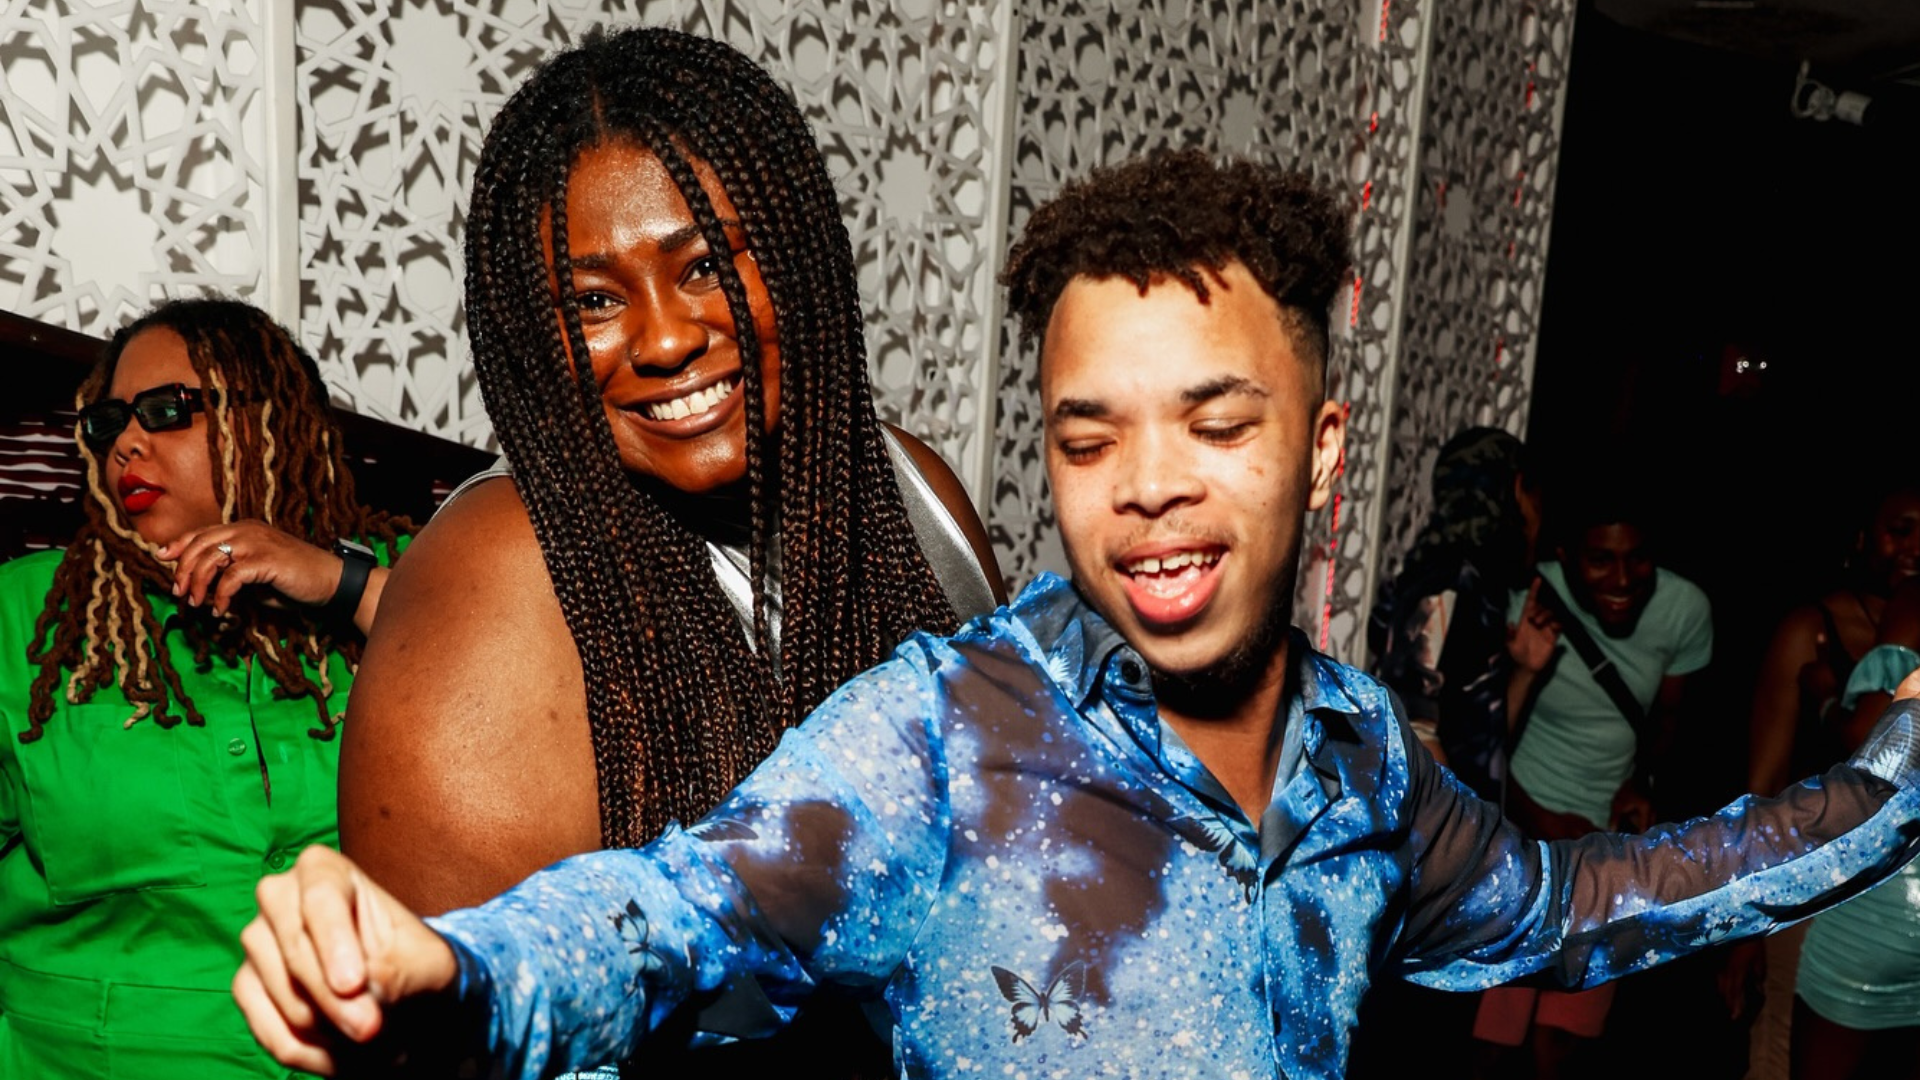 Raw Honey Is An Intrinsic And Stylish Presence In Brooklyn's Queer Nightlife Scene